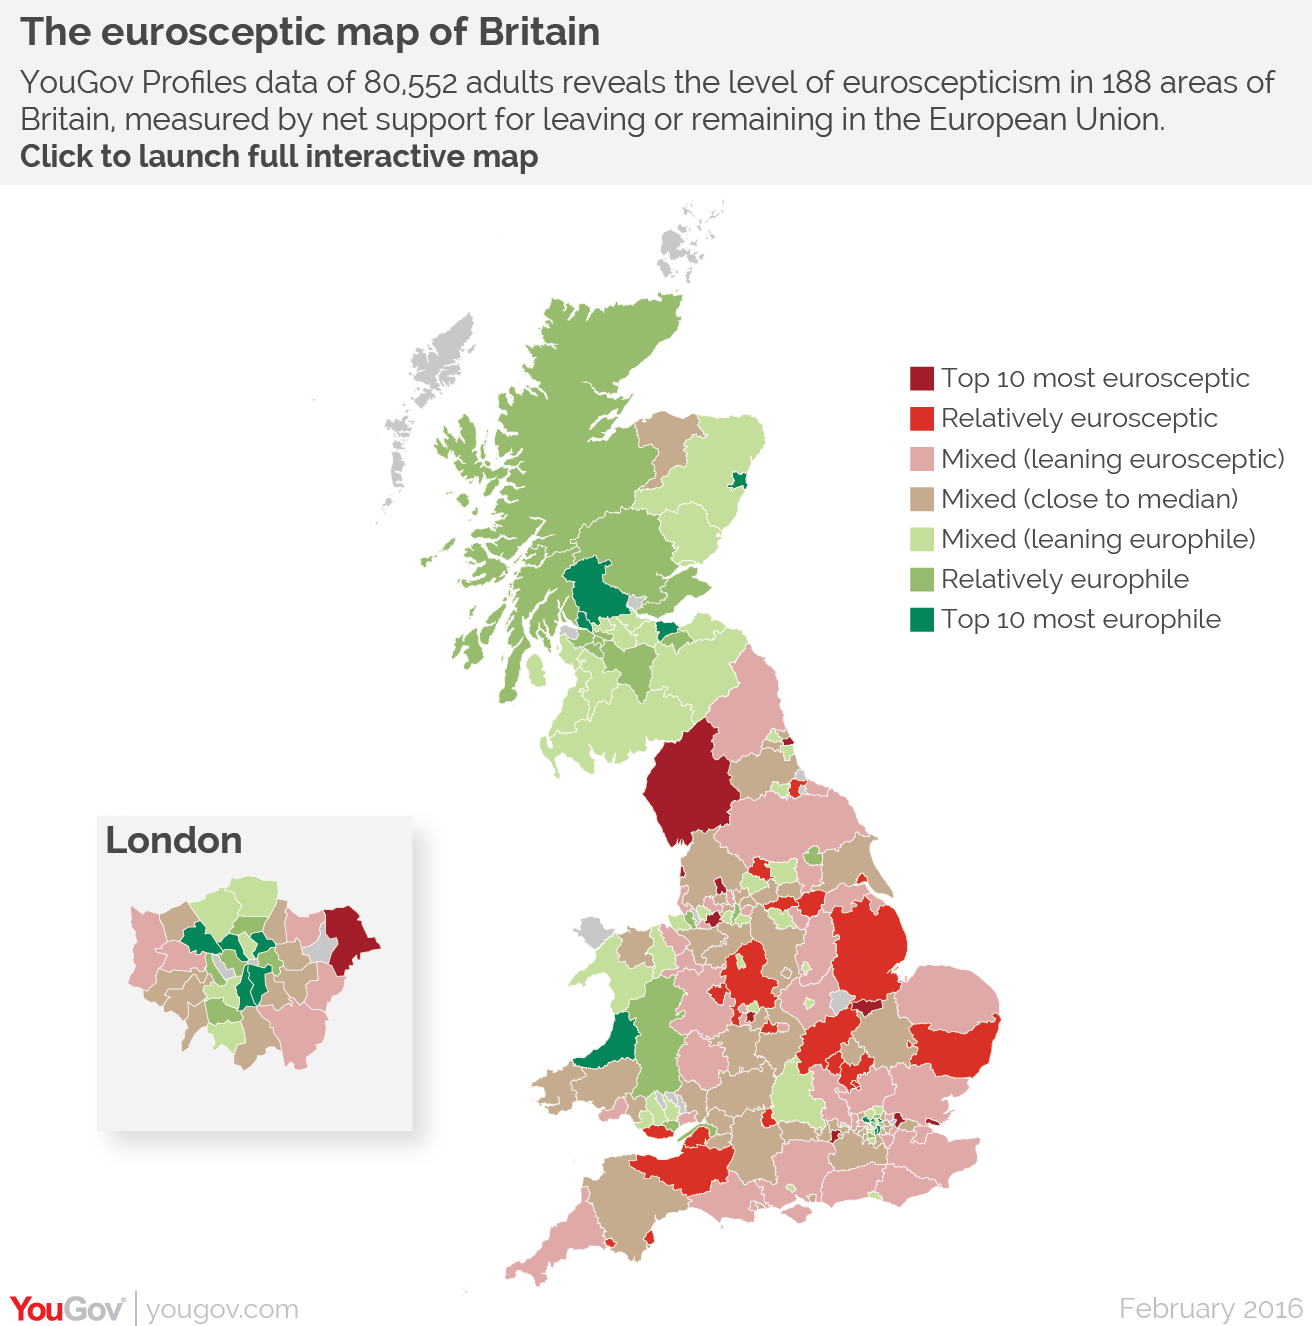 Map Uk Eu Referendum New YouGov Profiles research of over 80,000 people reveals the most and least Eurosceptic areas of Britain